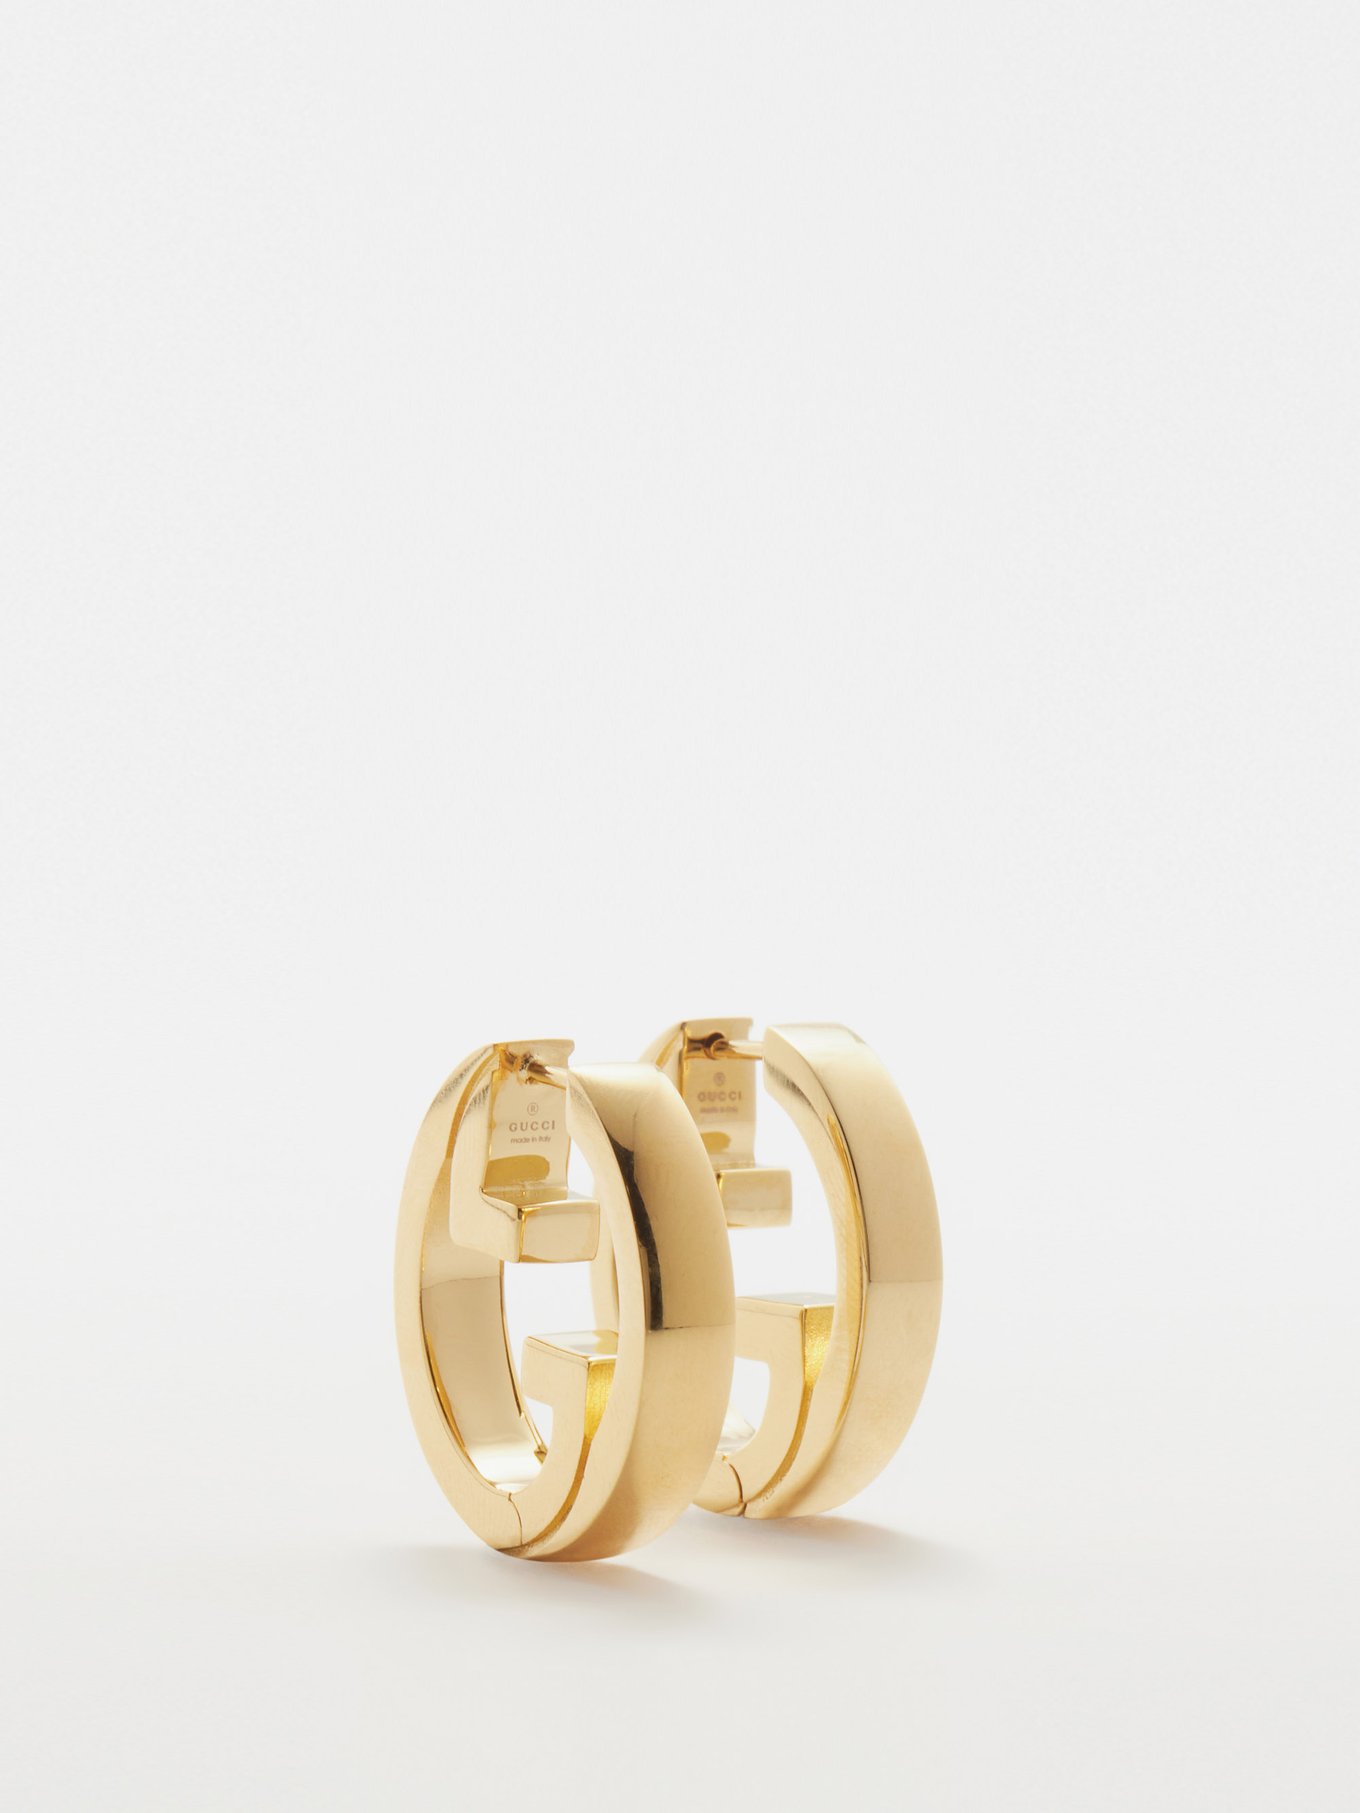 Gucci Hoop Earrings with Interlocking G, Gold-Toned Metal, Gold-Toned Metal